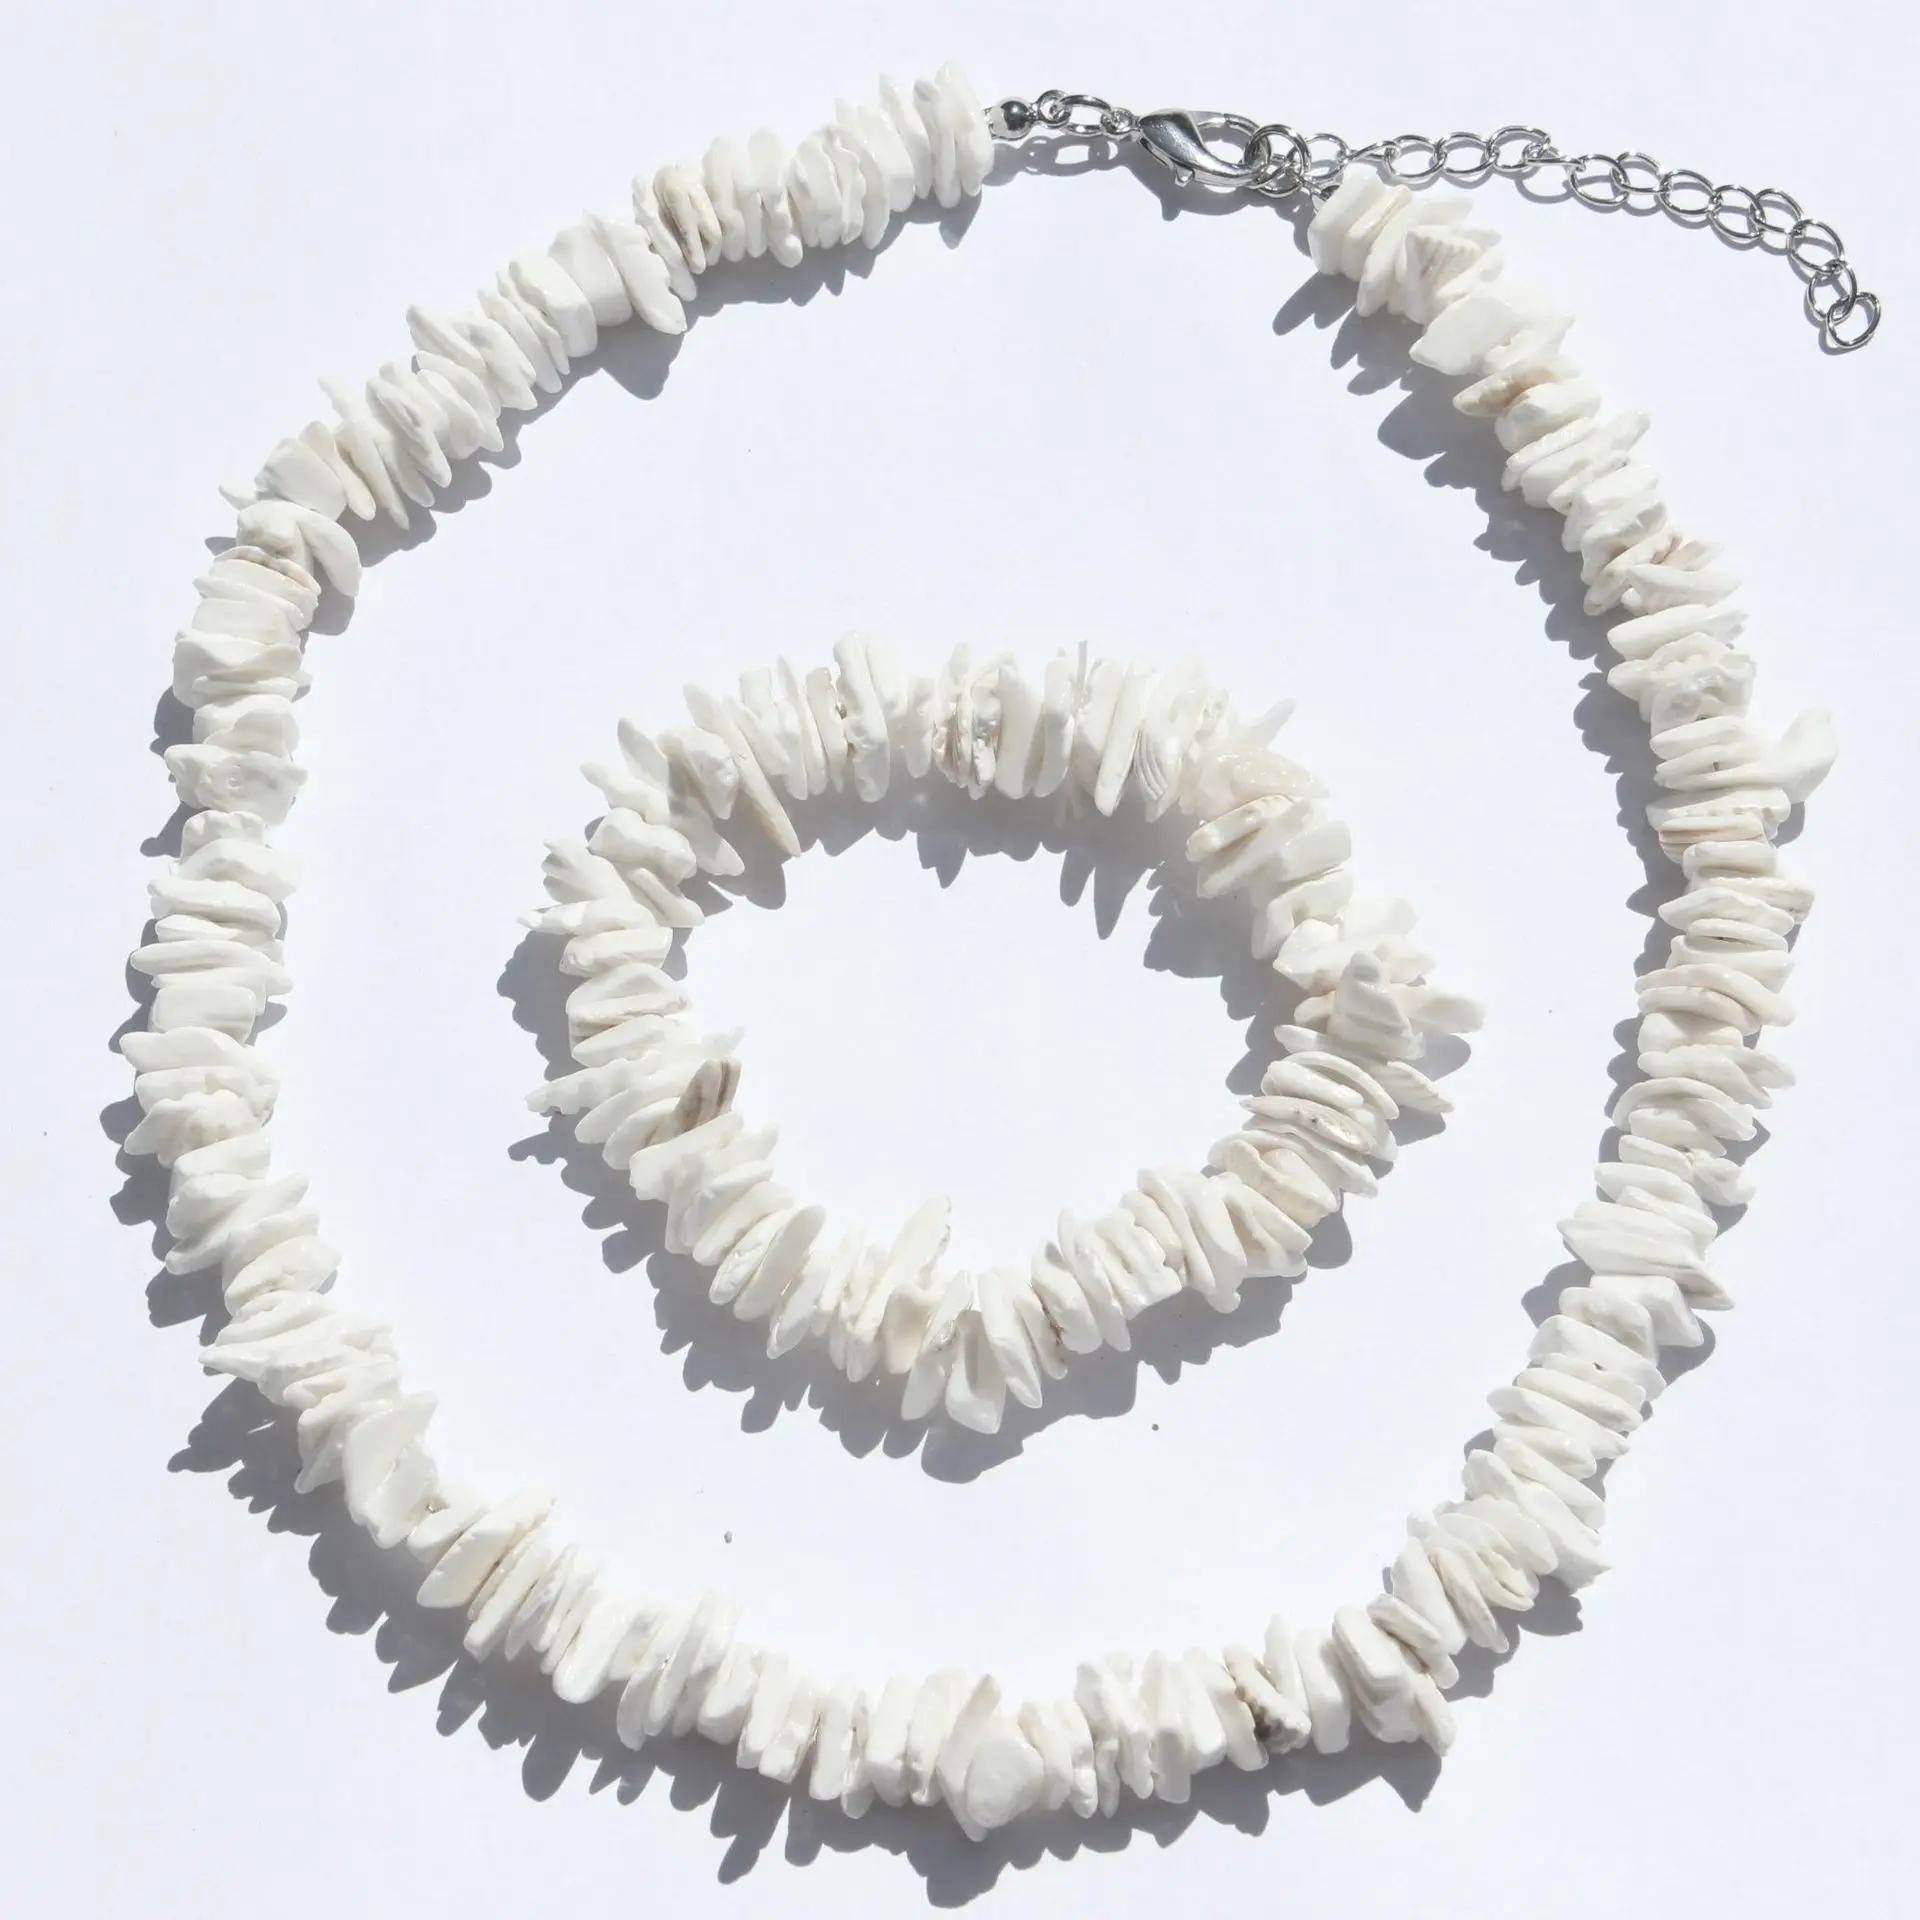 

Hawaii Bohemian Broken Cowrie Shell Bracelet Necklace Set White Puka Shell Necklace with Adjustable Chain